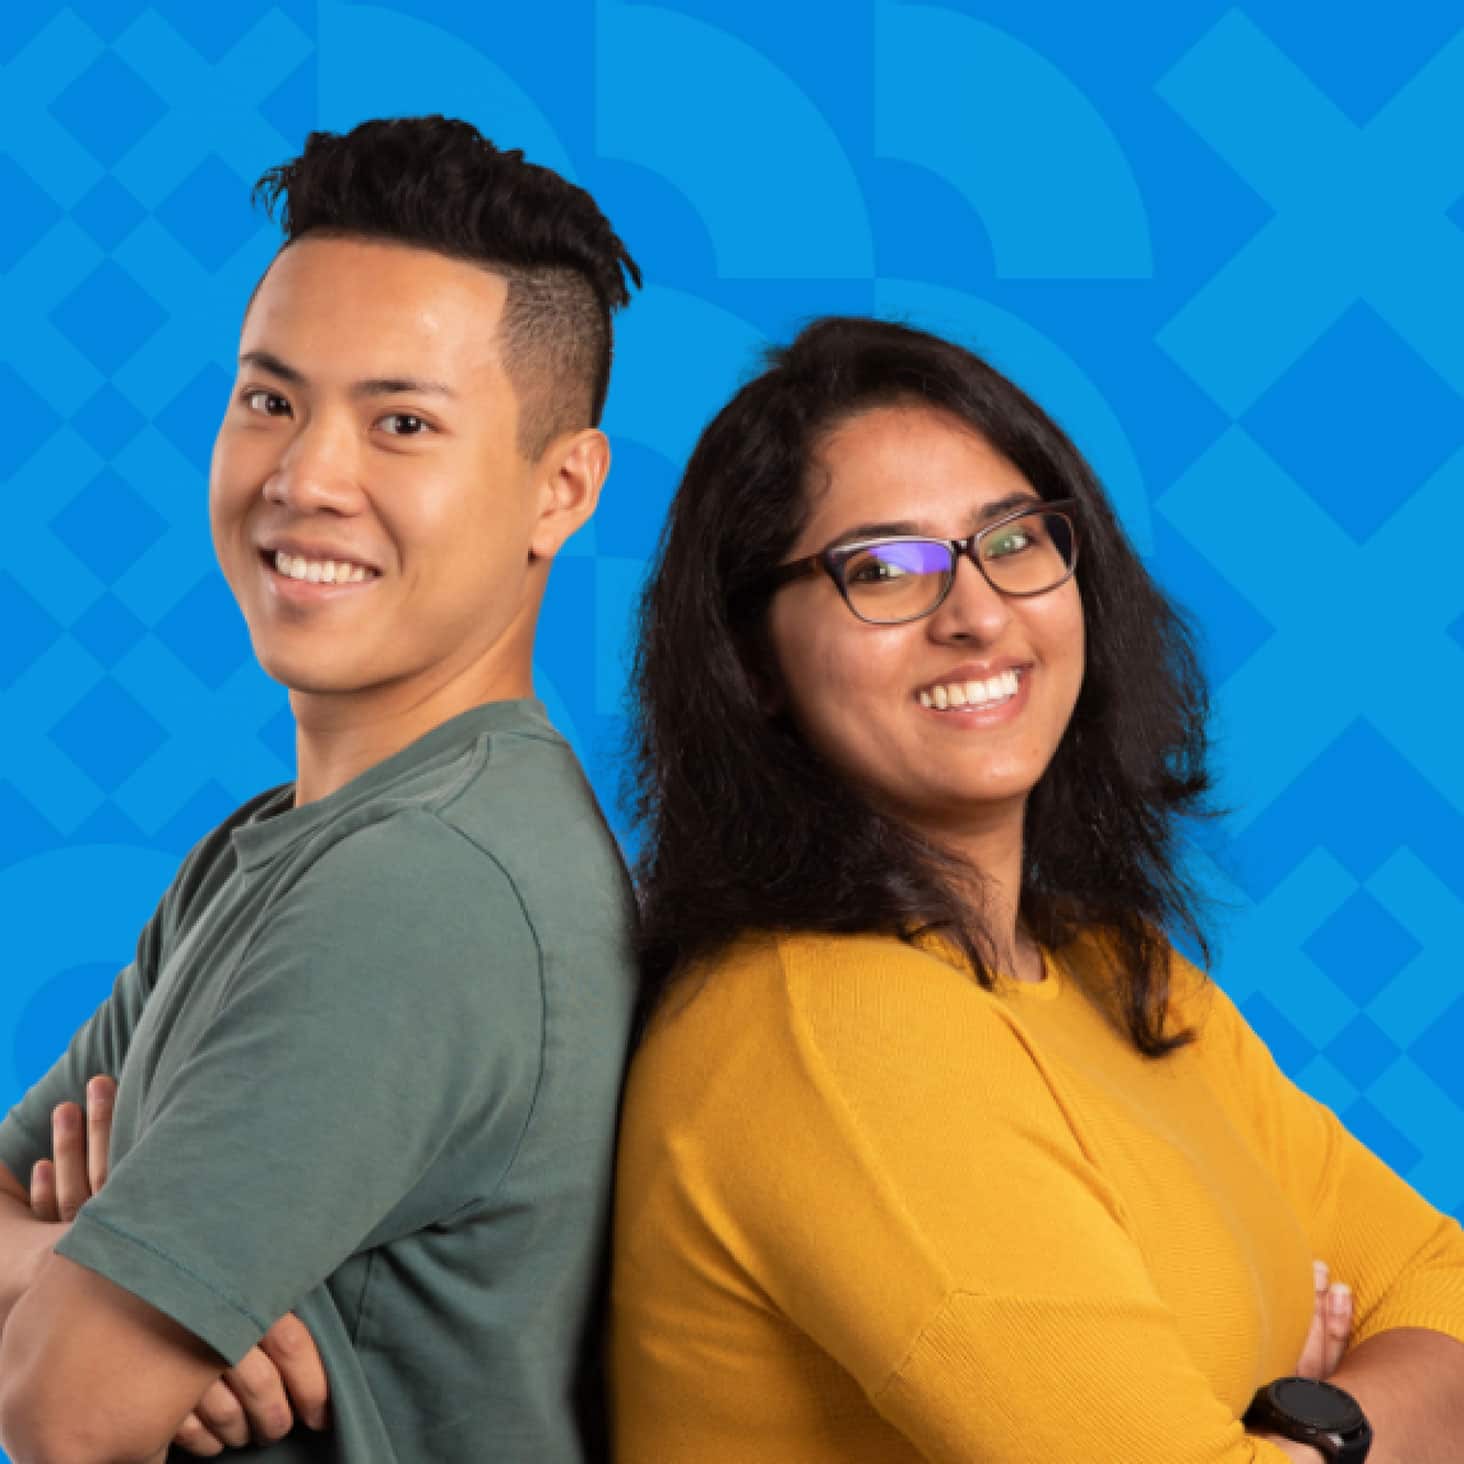 Two people in front of a Xero branded background